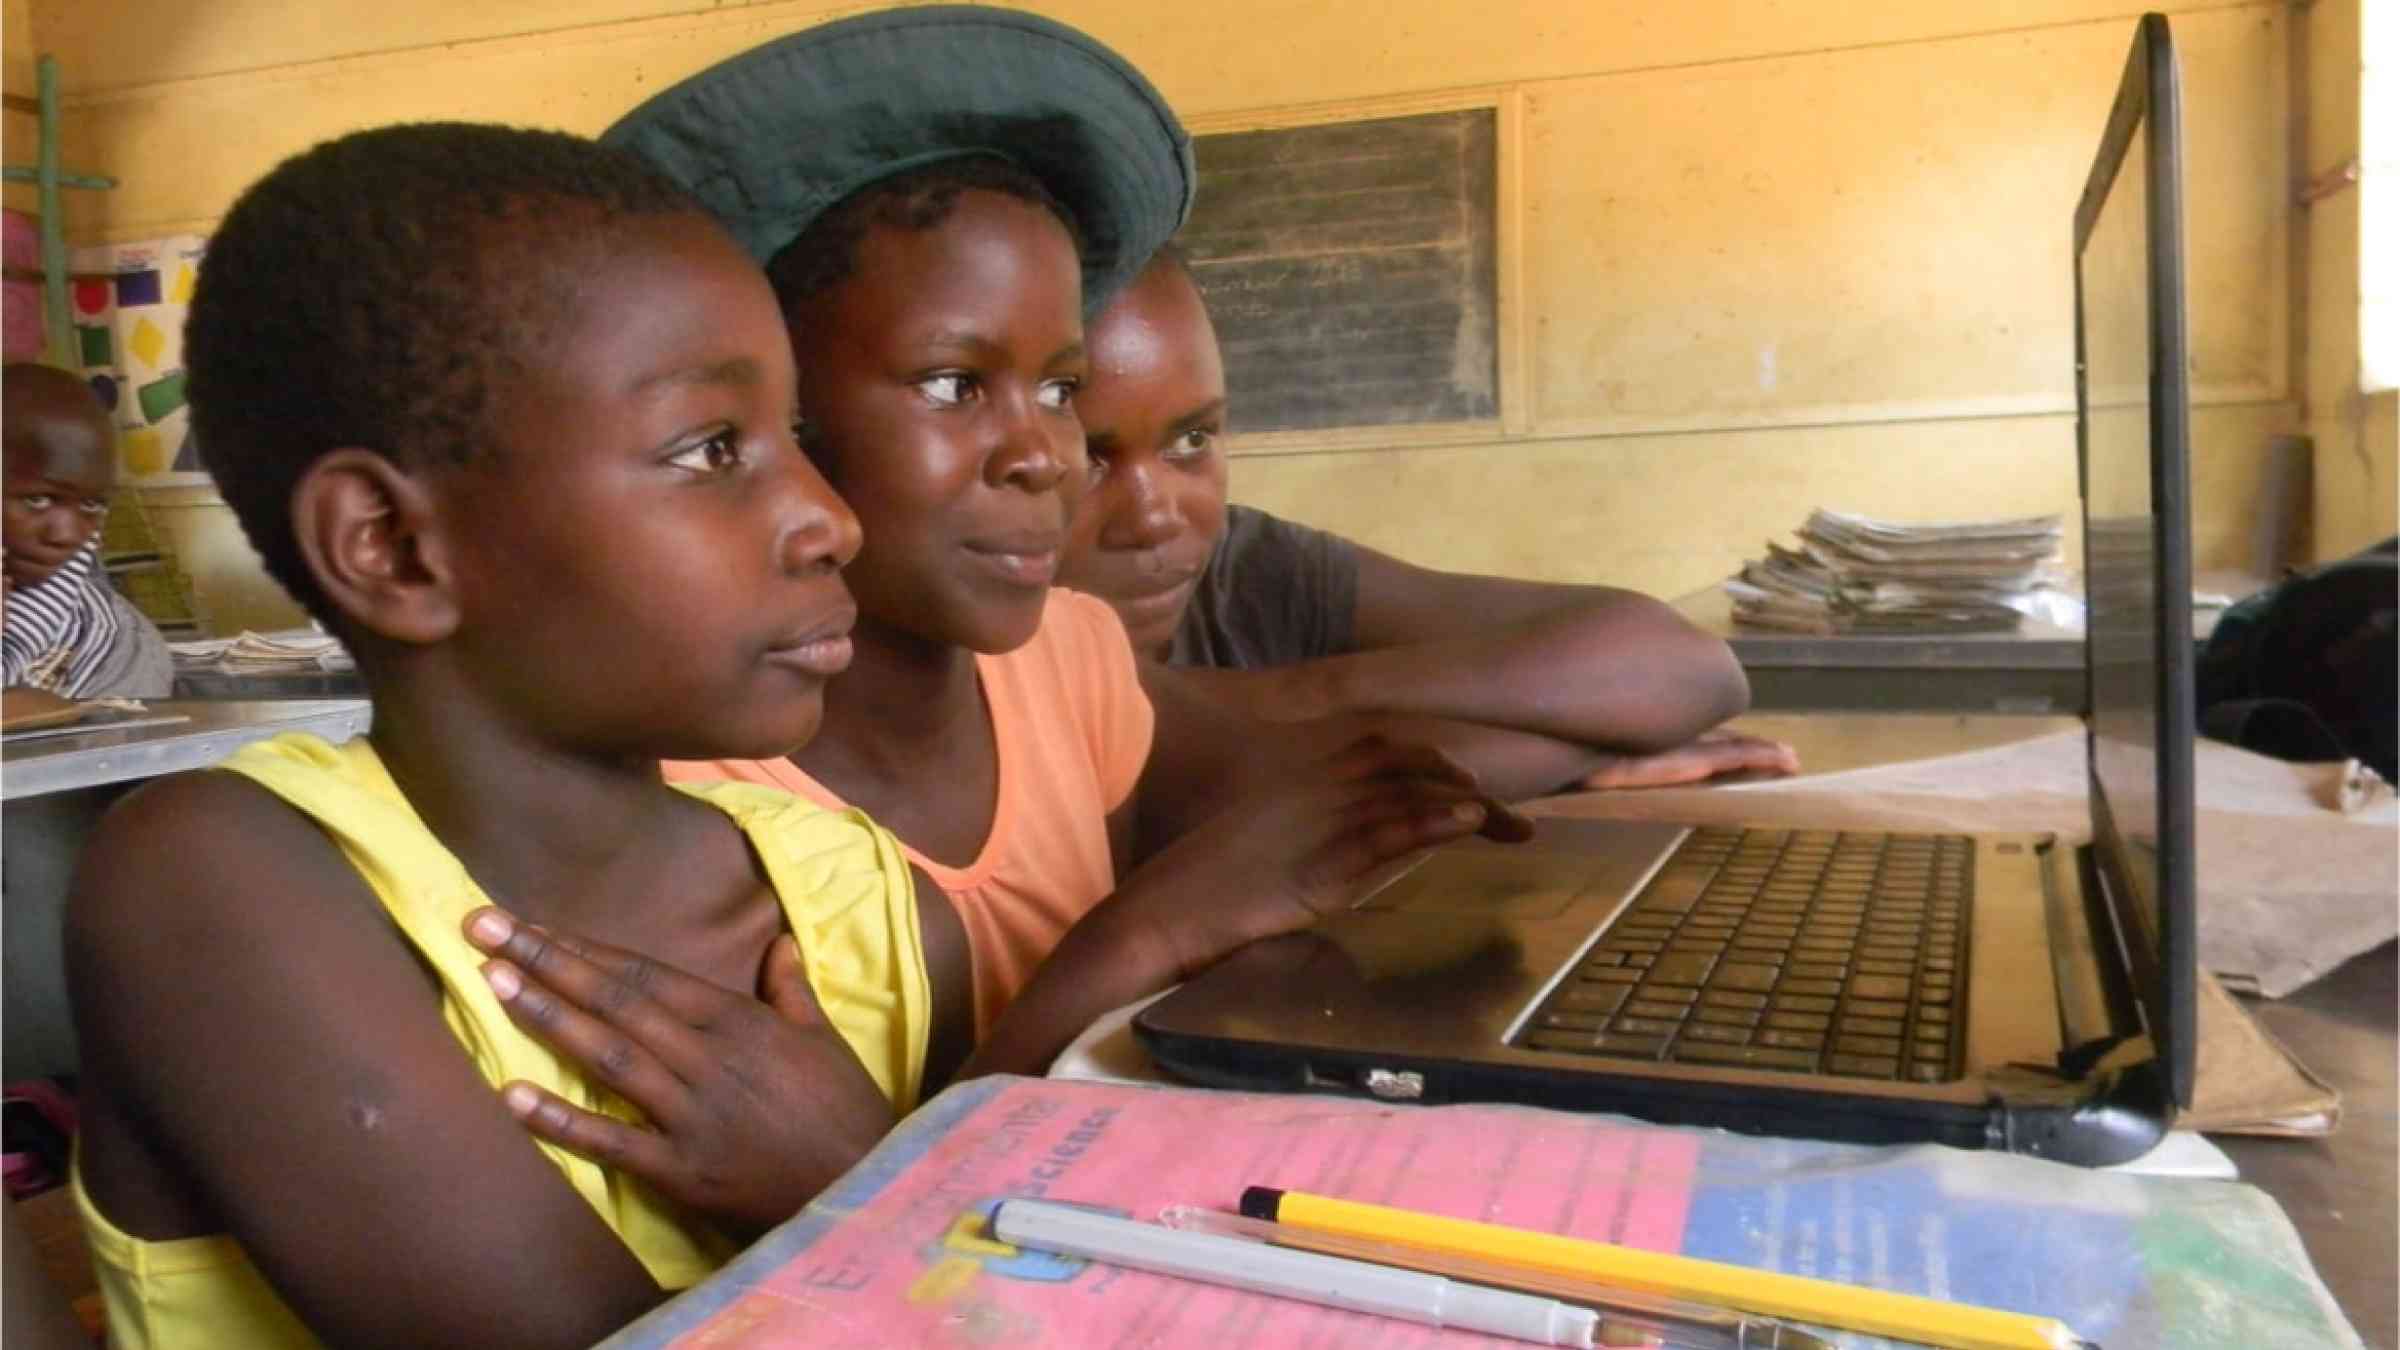 Three high school students in Zimbabwe working on a laptop.